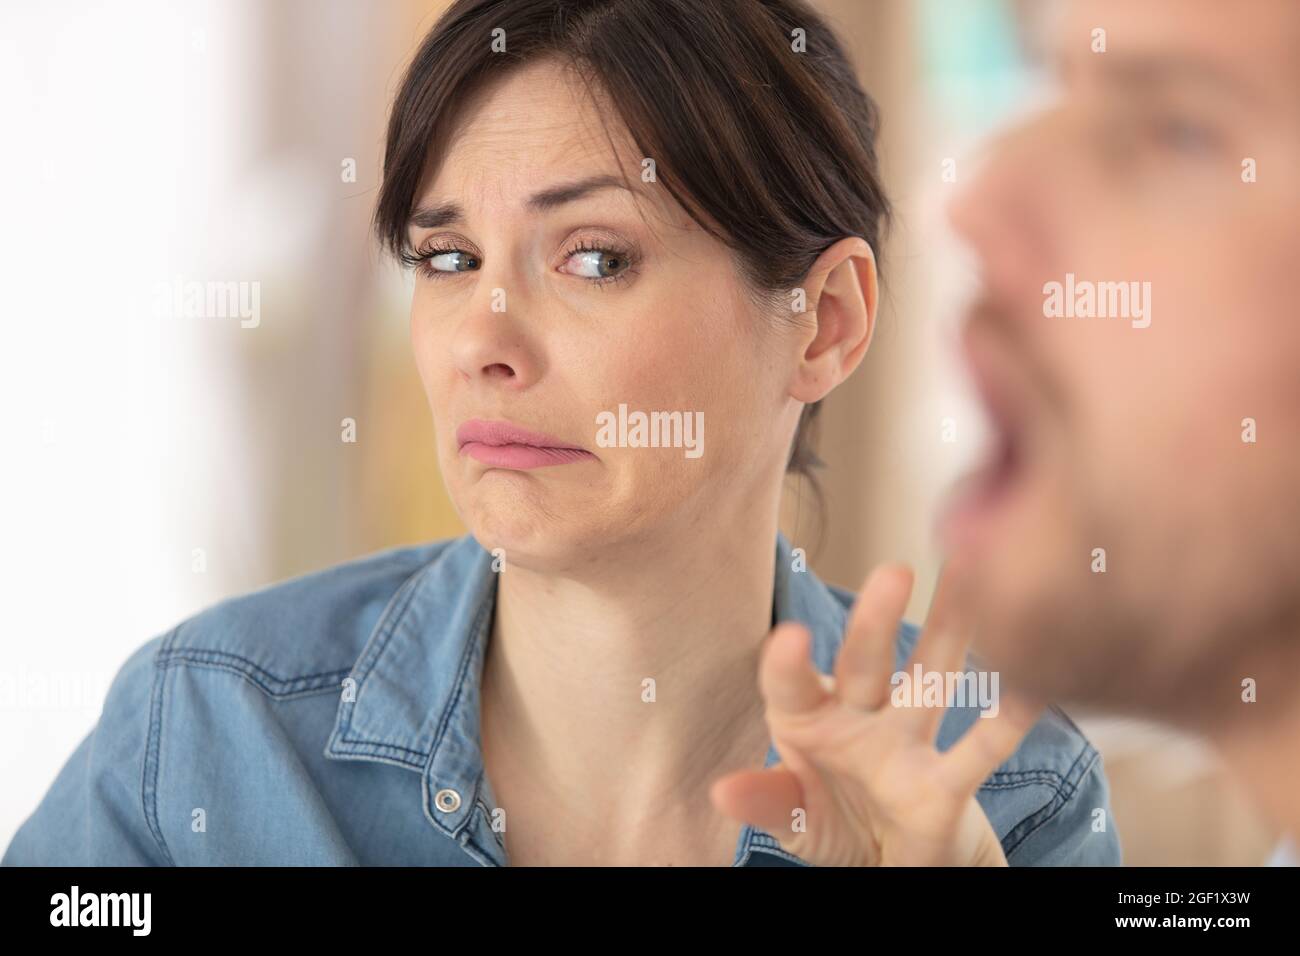 woman makes disgusted expression beside man with open mouth Stock Photo